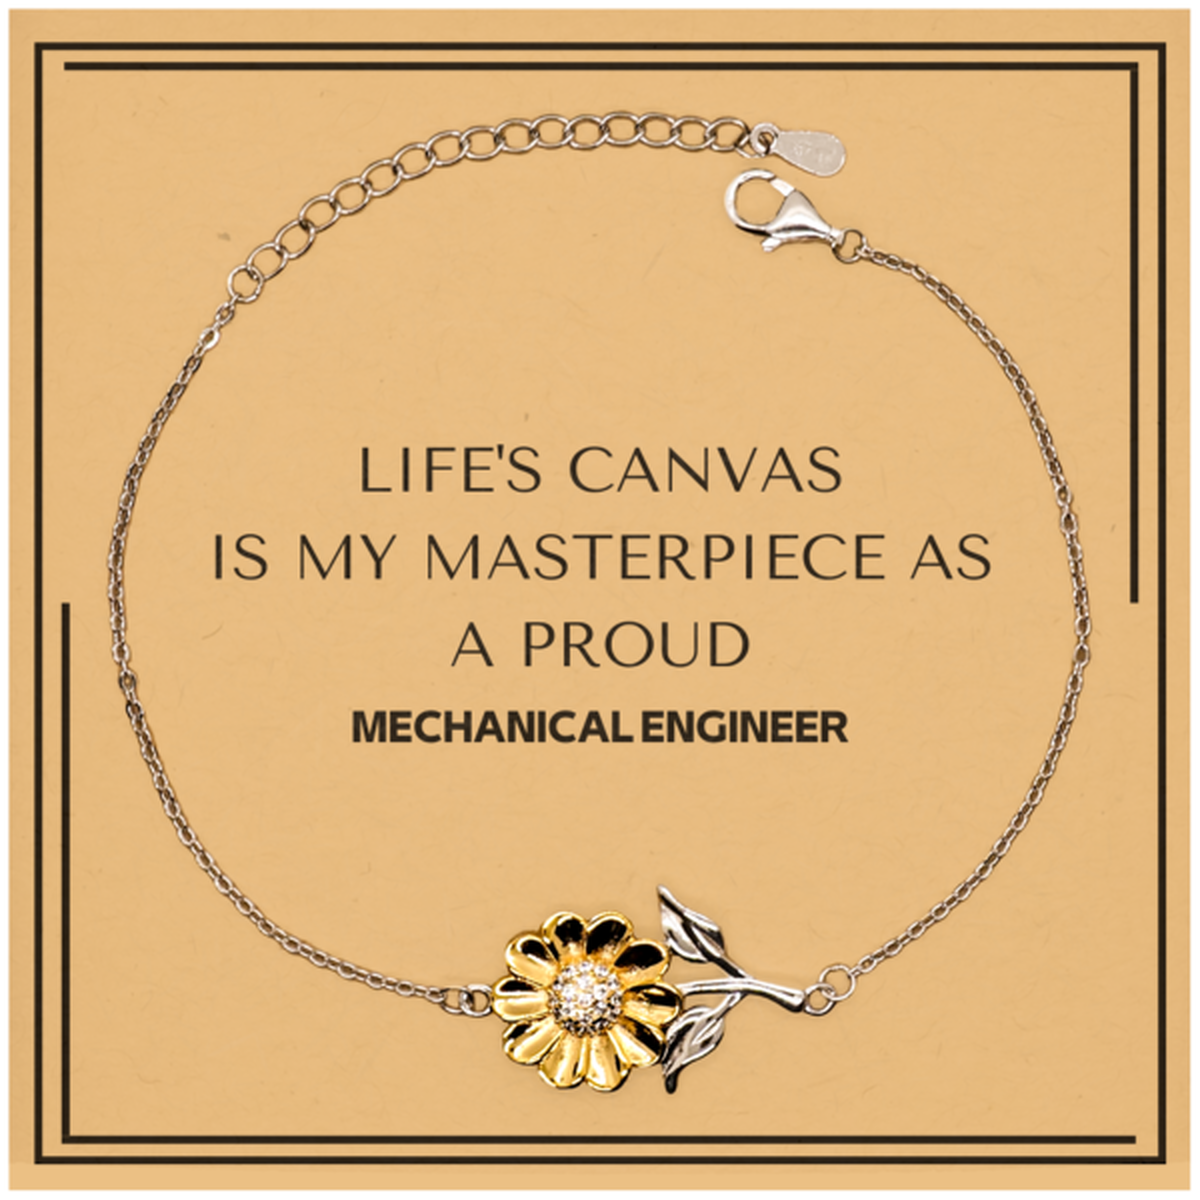 Proud Mechanical Engineer Gifts, Life's canvas is my masterpiece, Epic Birthday Christmas Unique Sunflower Bracelet For Mechanical Engineer, Coworkers, Men, Women, Friends